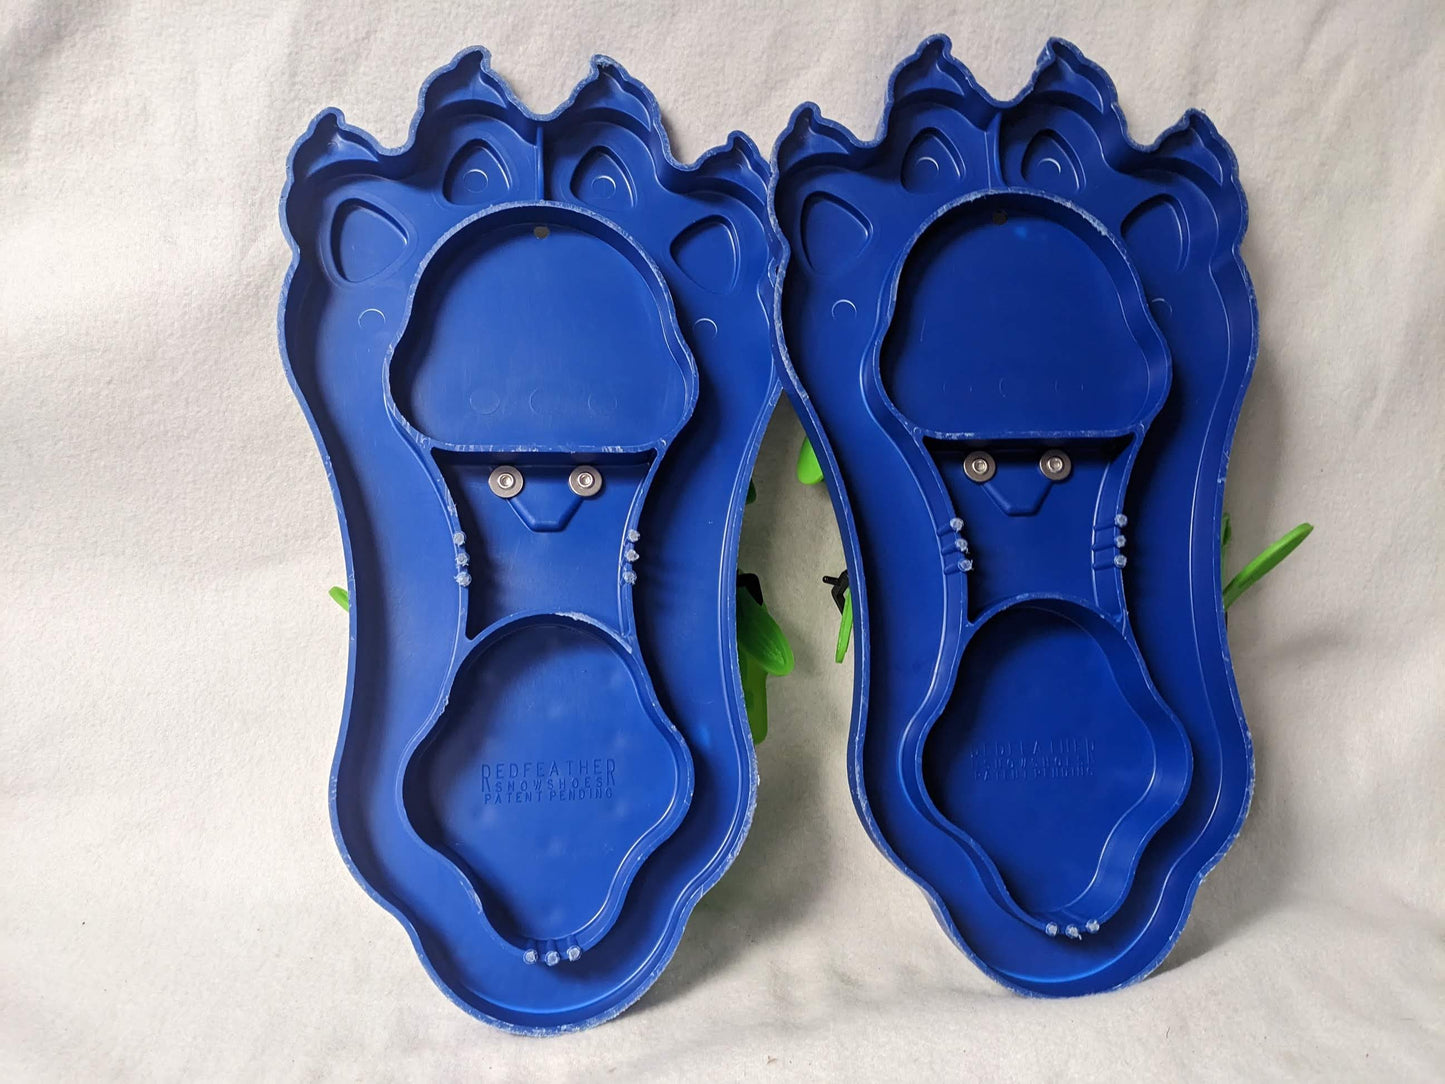 Redfeather Snowpaw Kids Snowshoes Size 15 In Color Blue Condition Used